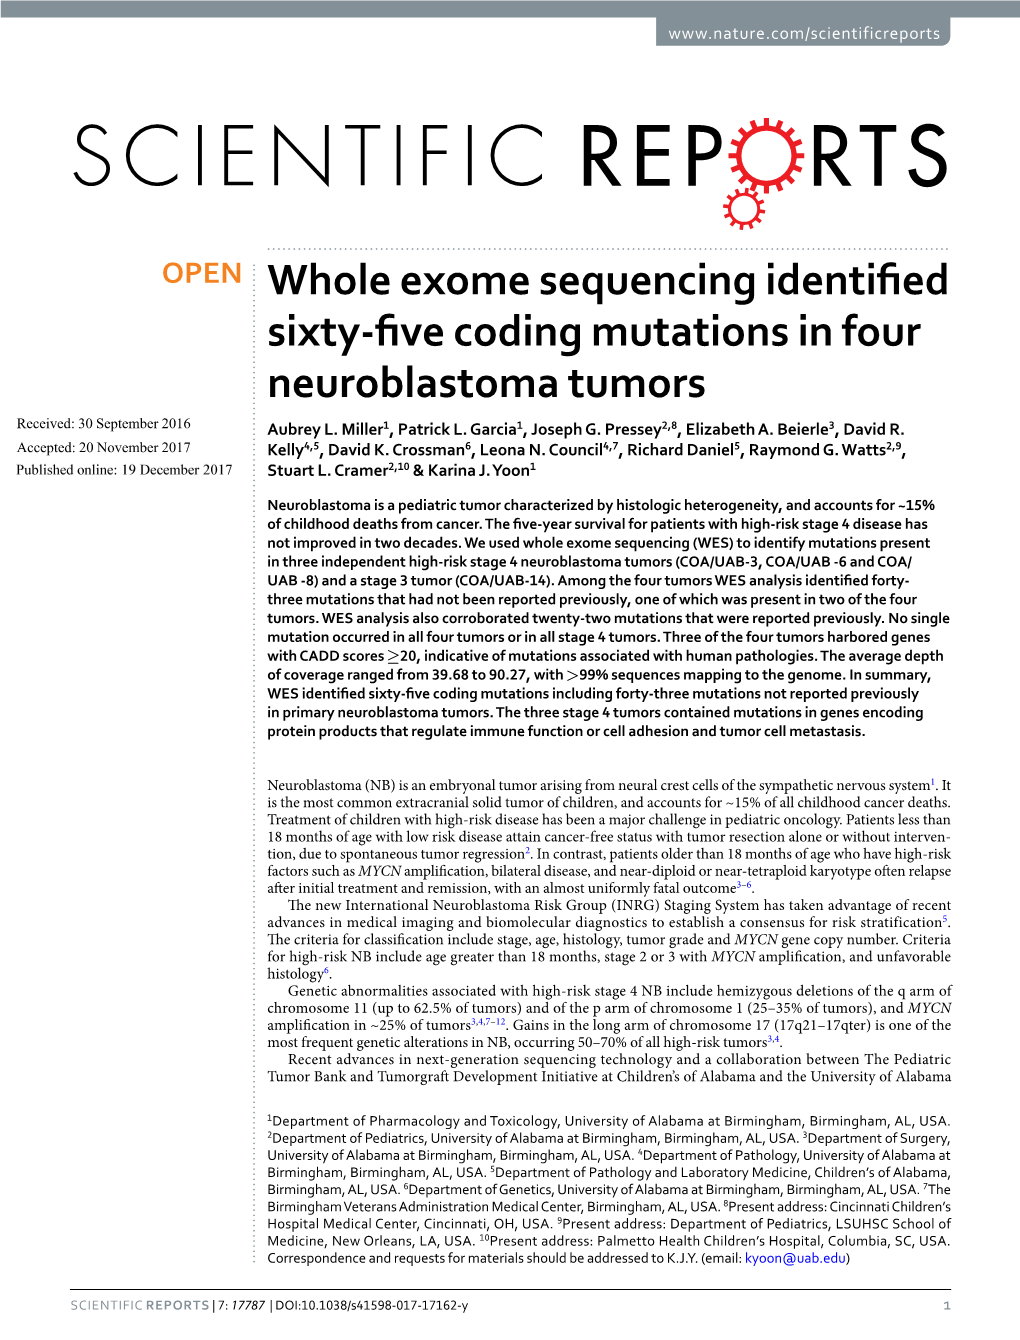 Whole Exome Sequencing Identified Sixty-Five Coding Mutations in Four